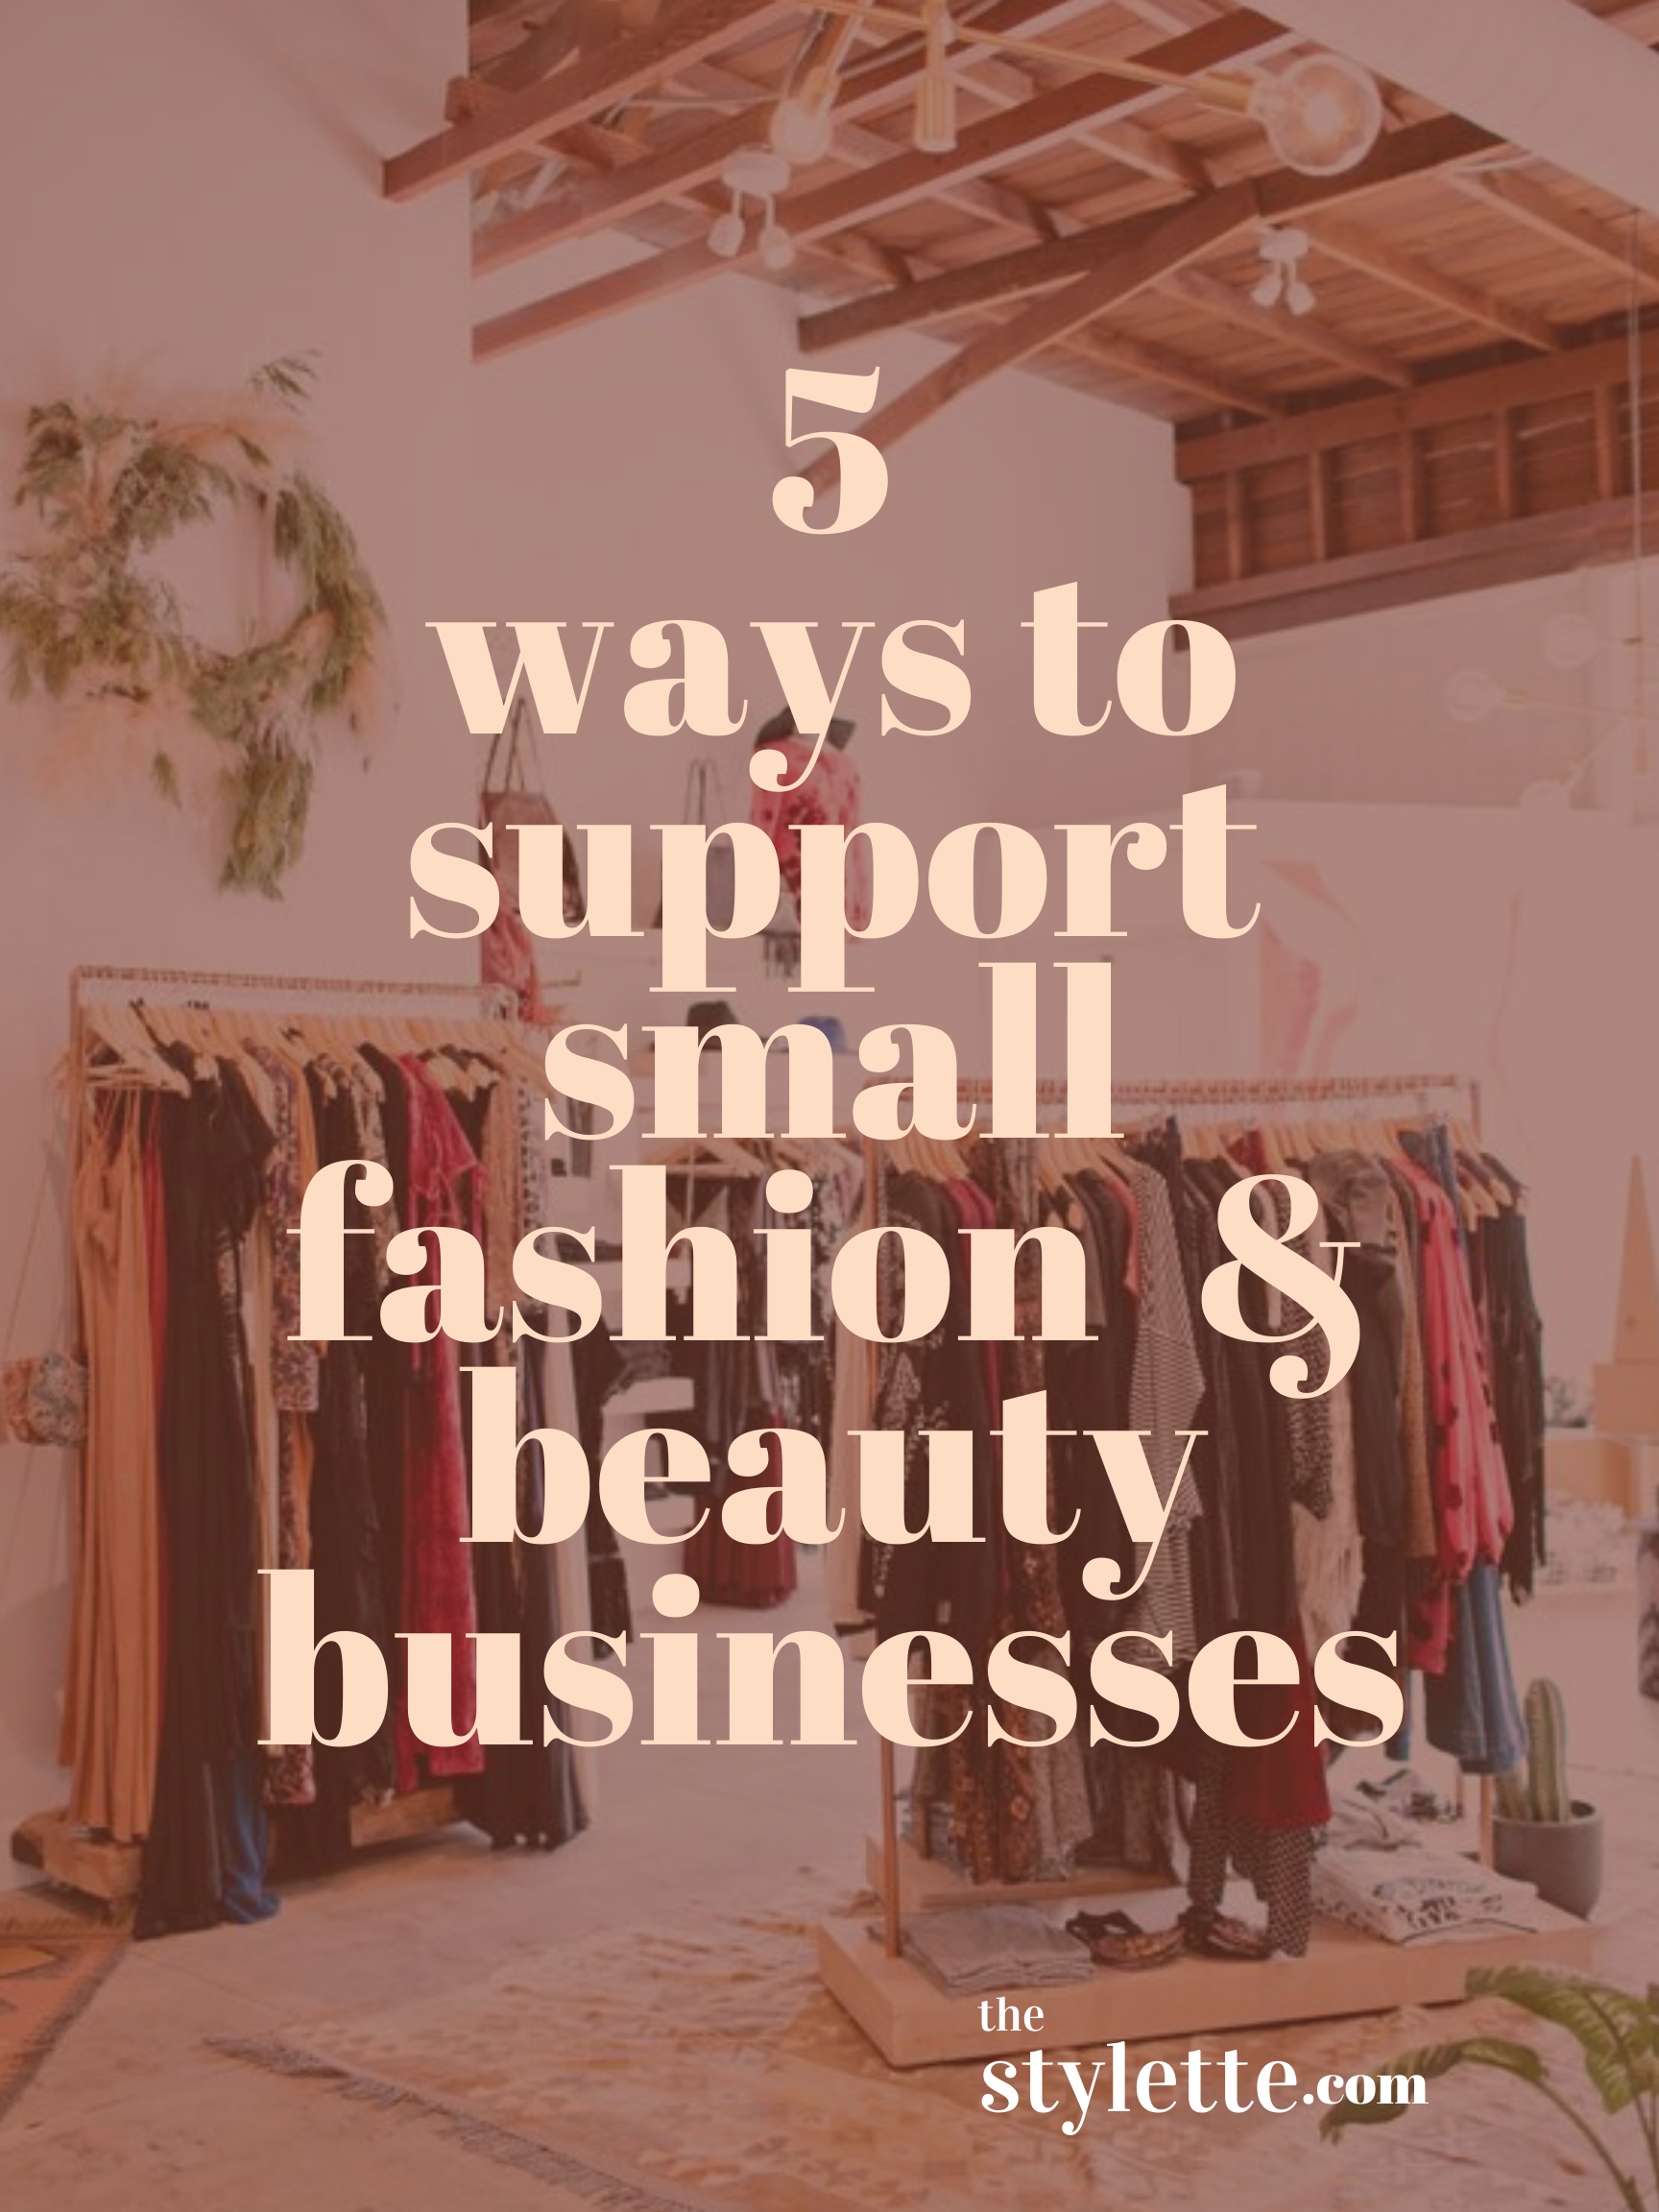 You are currently viewing 5 Ways to Support Small Businesses in Beauty or Fashion During COVID-19